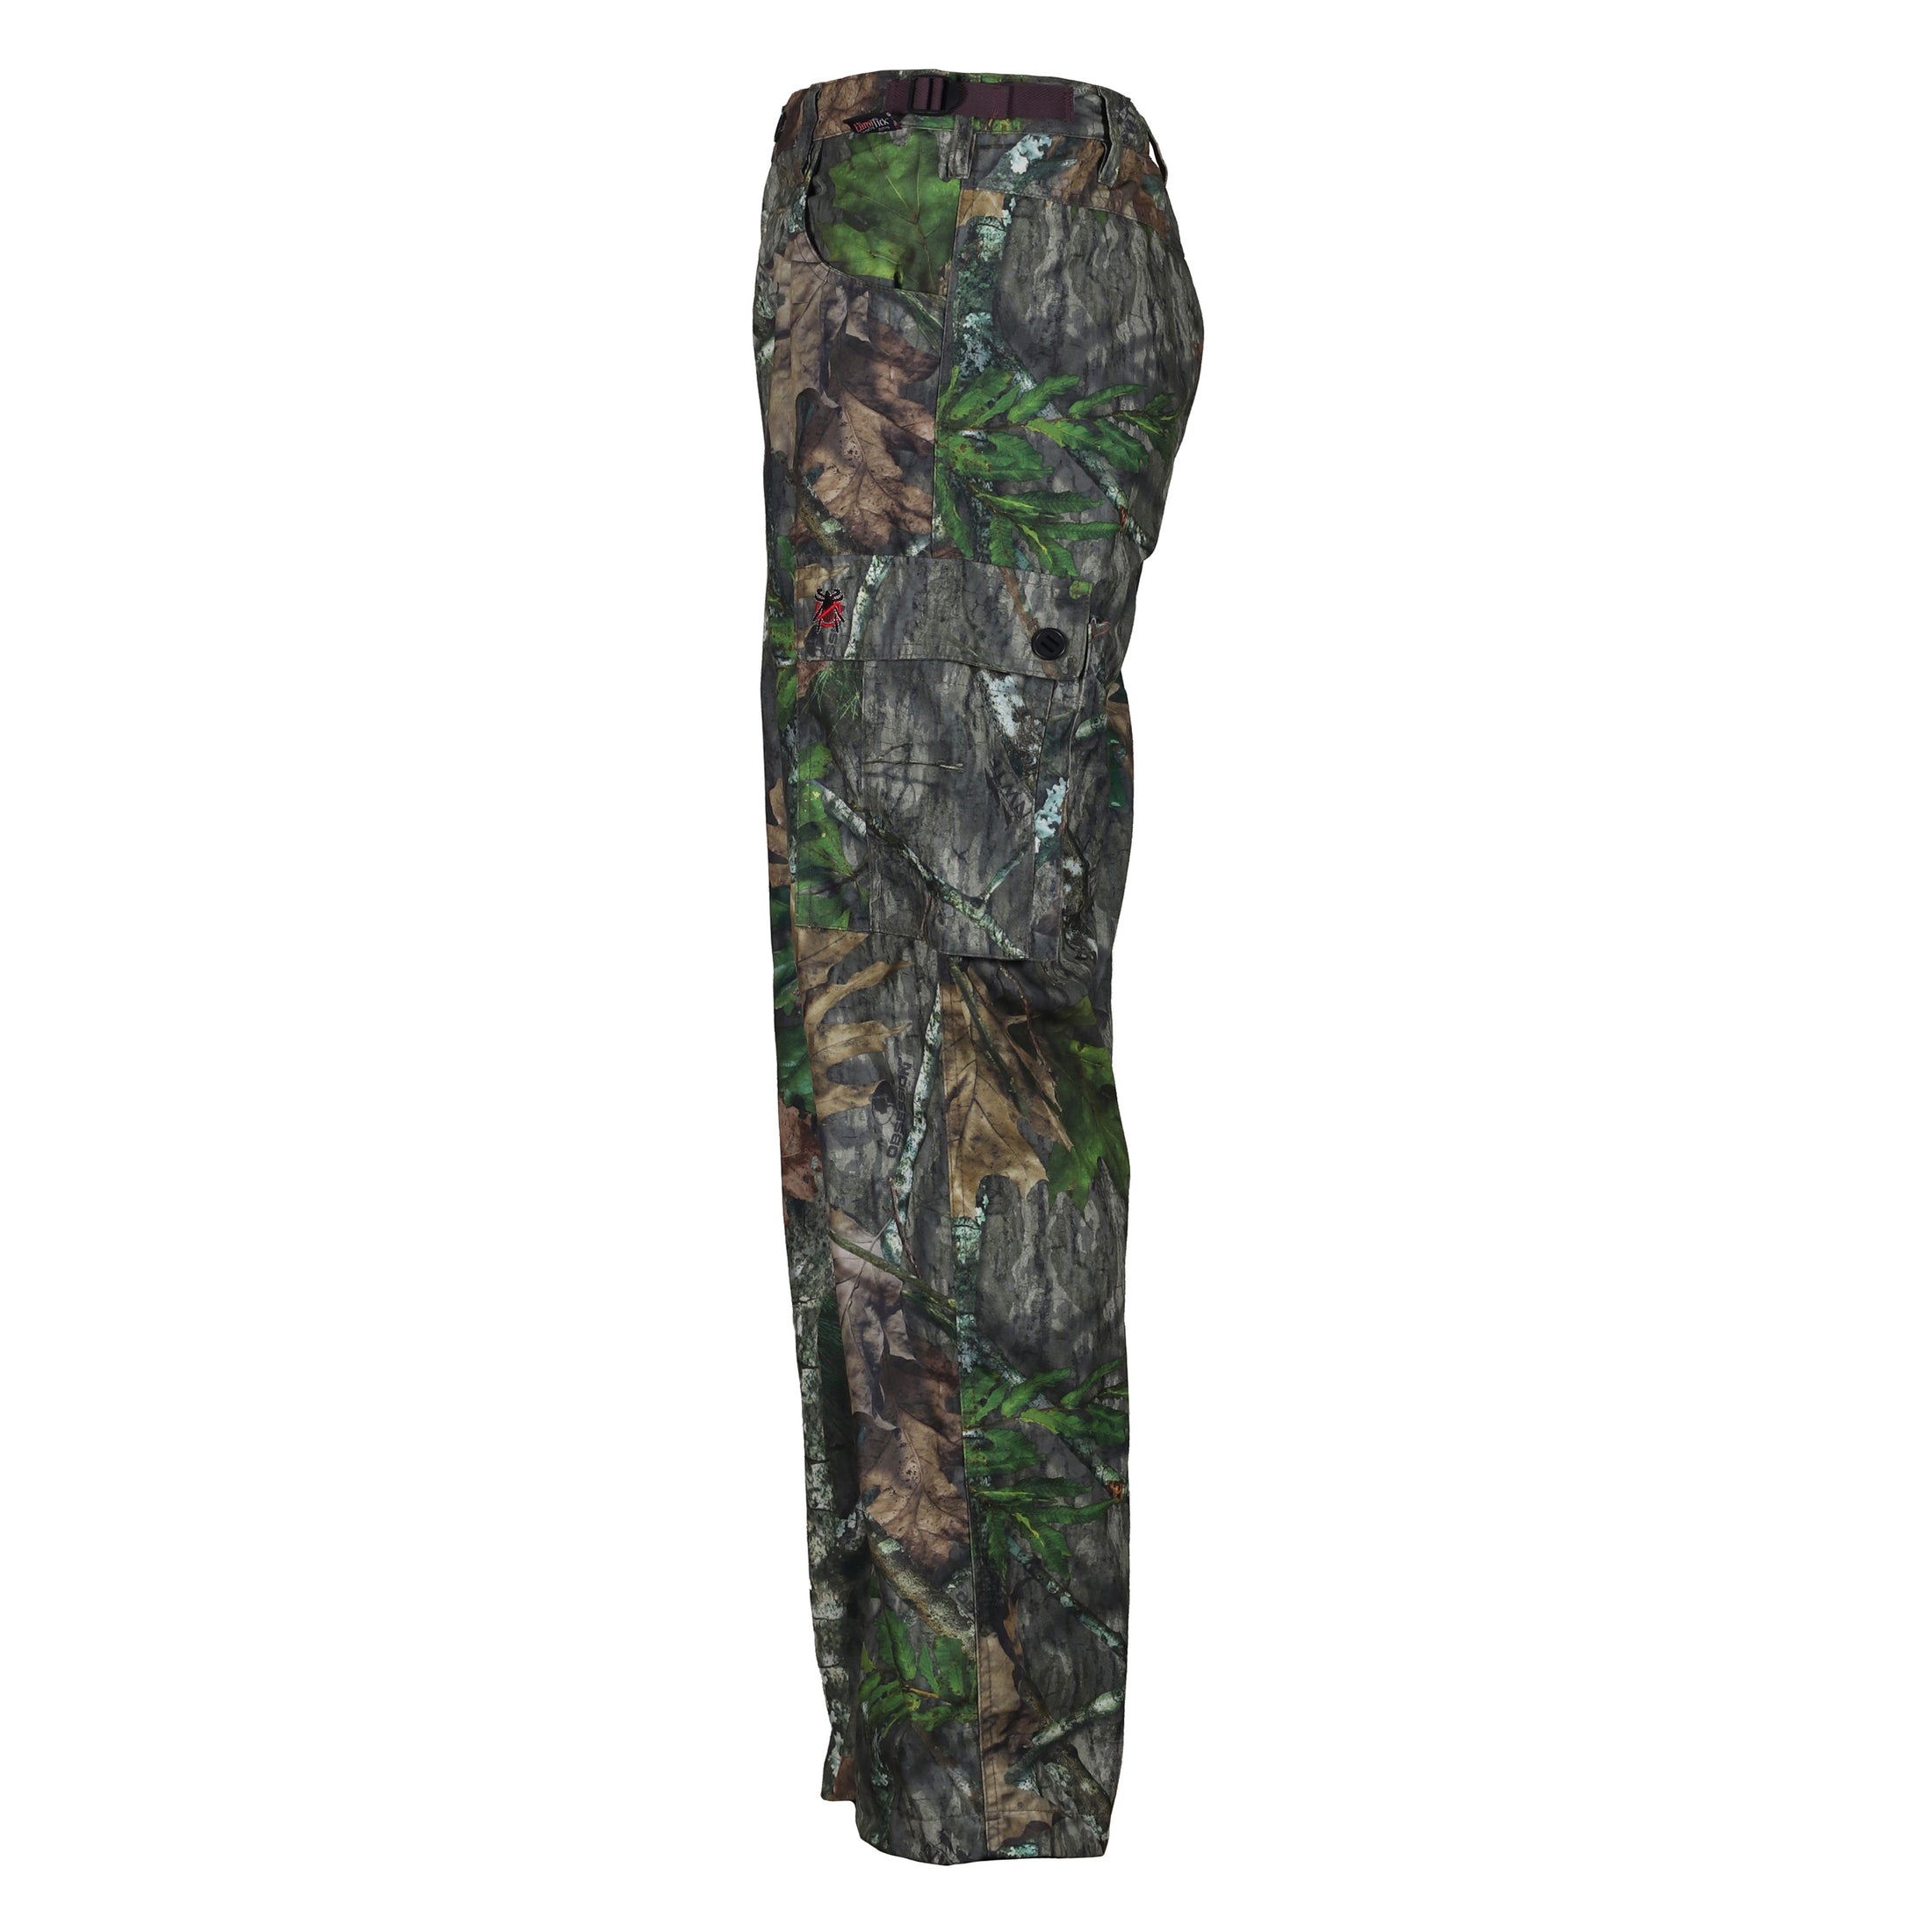 gamehide ElimiTick Insect Repellent Five Pocket Pant side (mossy oak obsession)